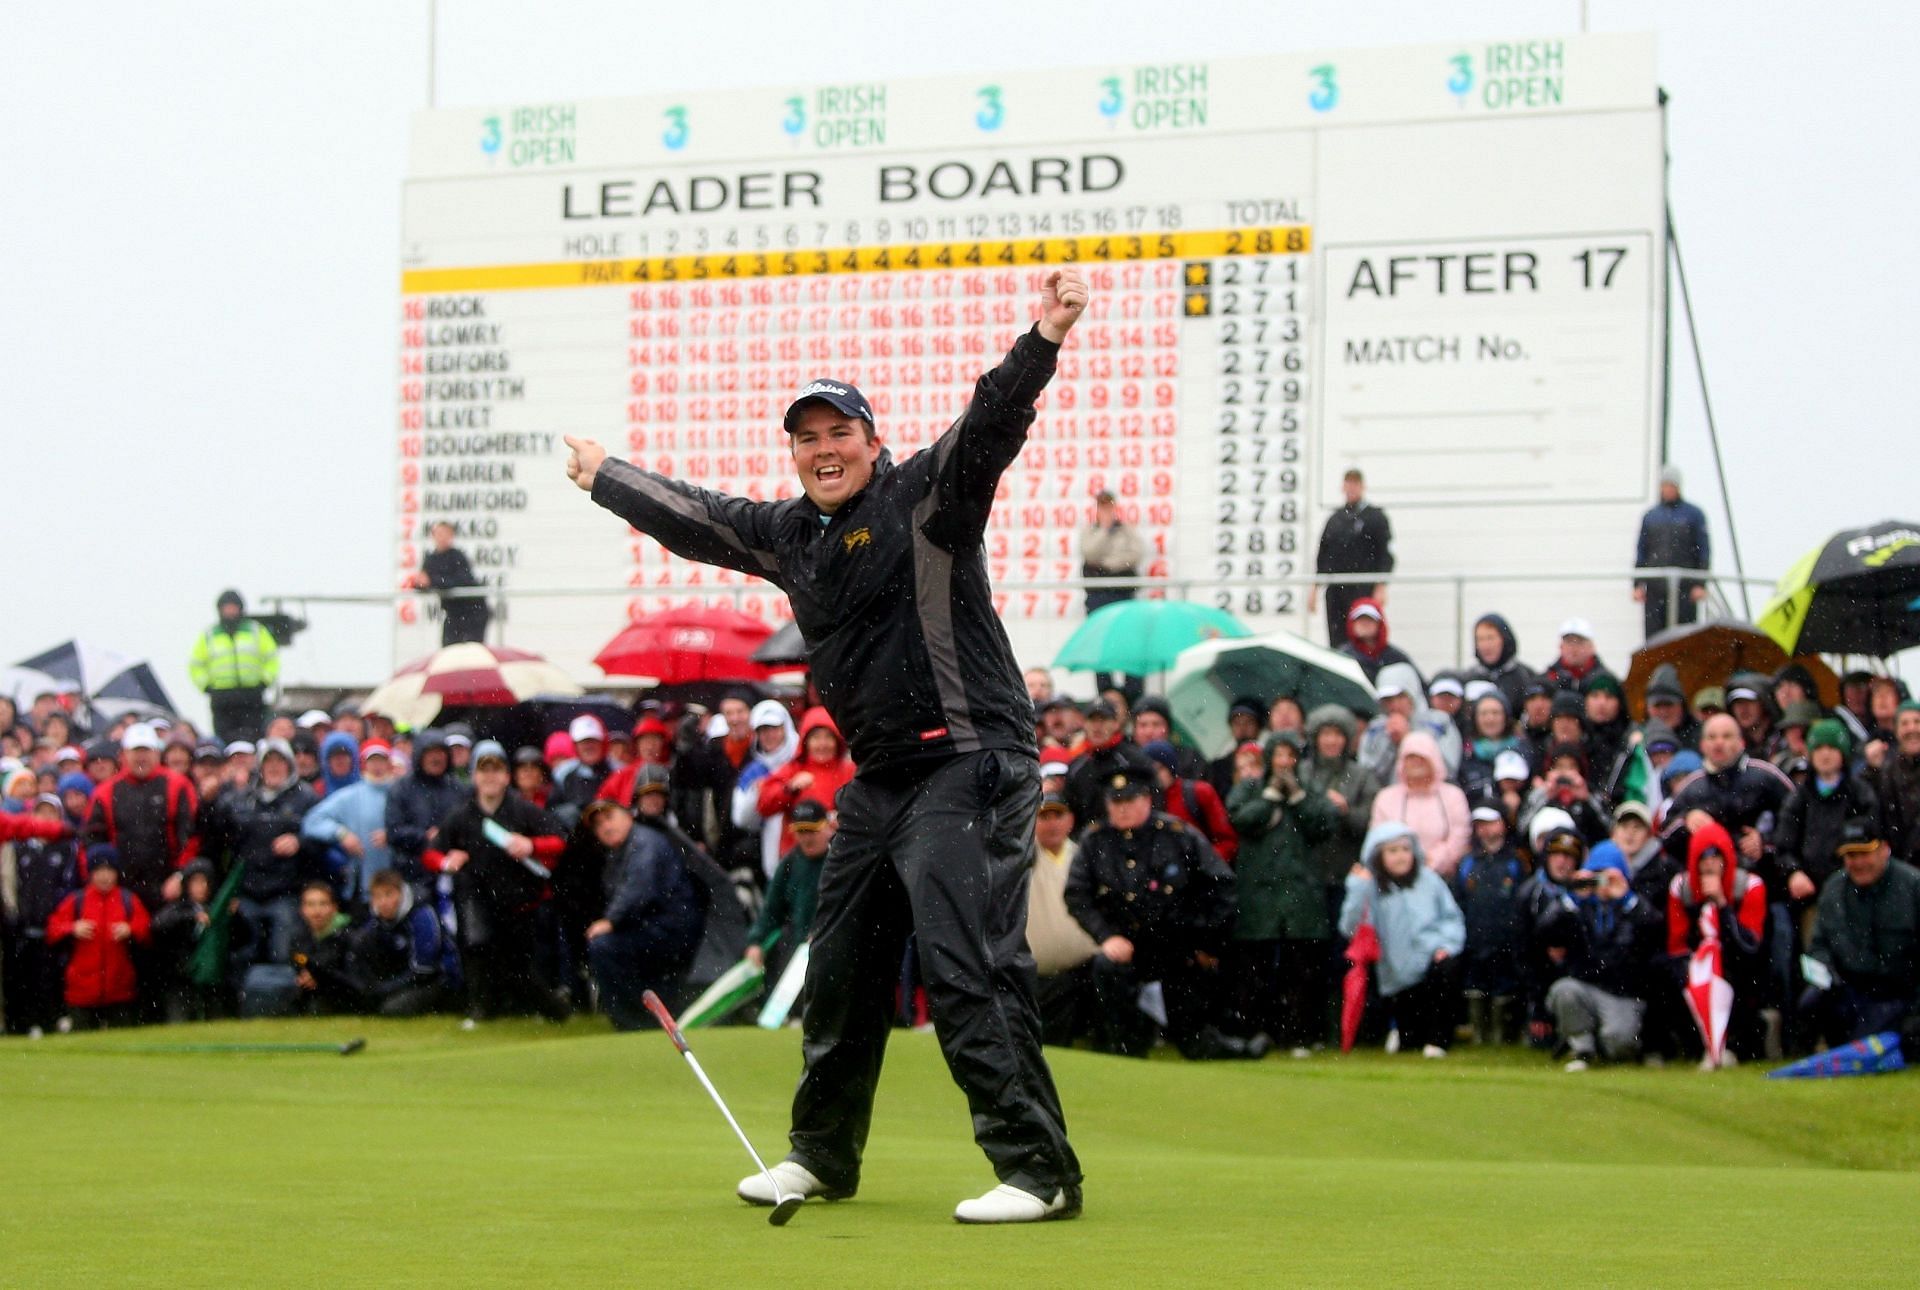 The winning moment for Shane Lowry at The Irish Open 2009 (Image via Getty).